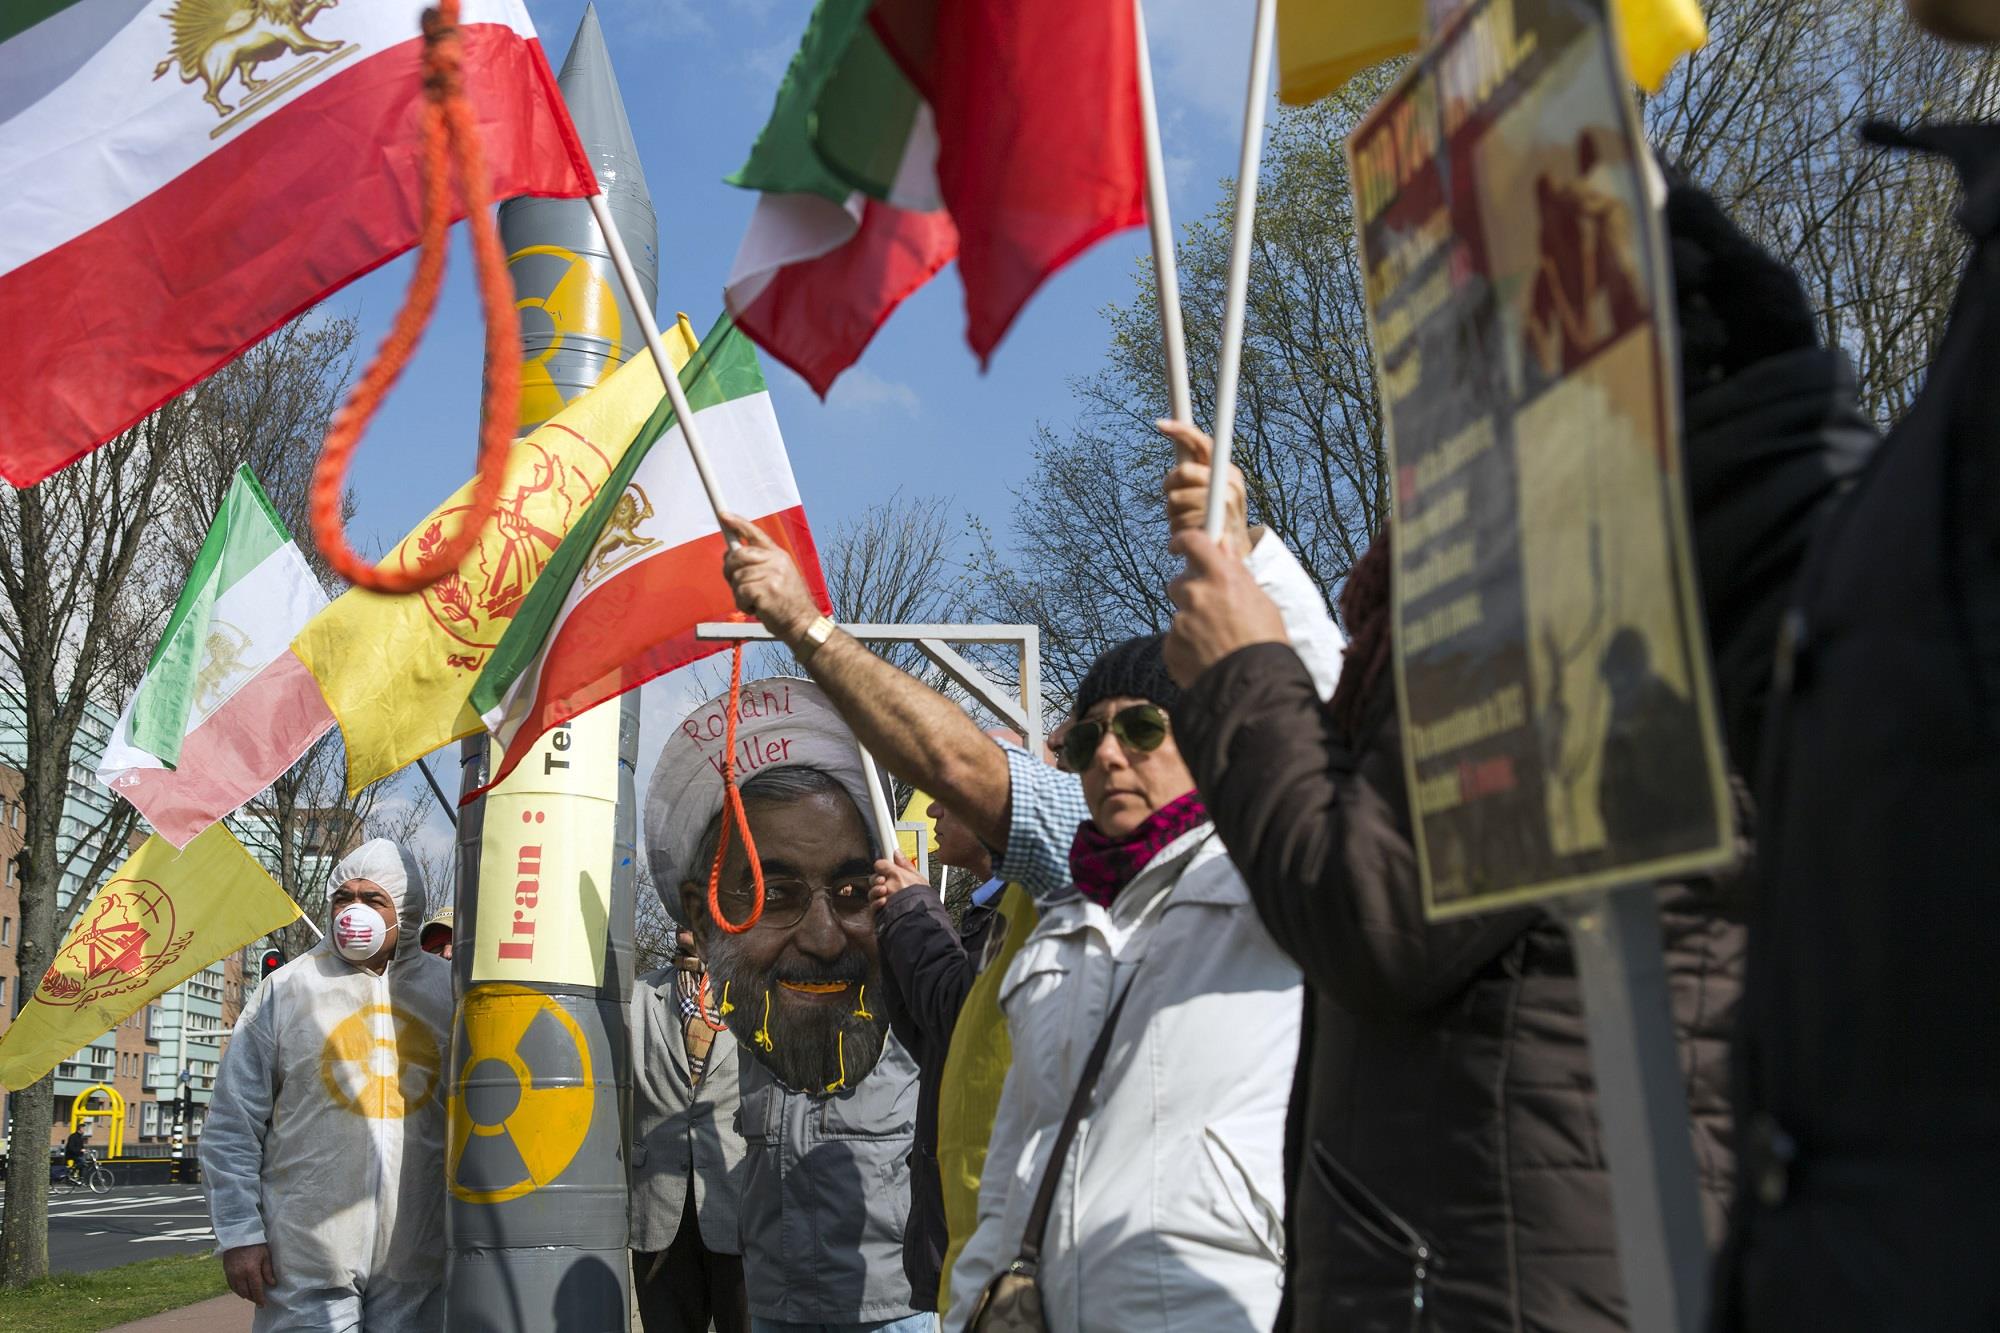 People protest against executions and human rights violations in Iran on a square near the Nuclear Security Summit in The Hague March 25, 2014.